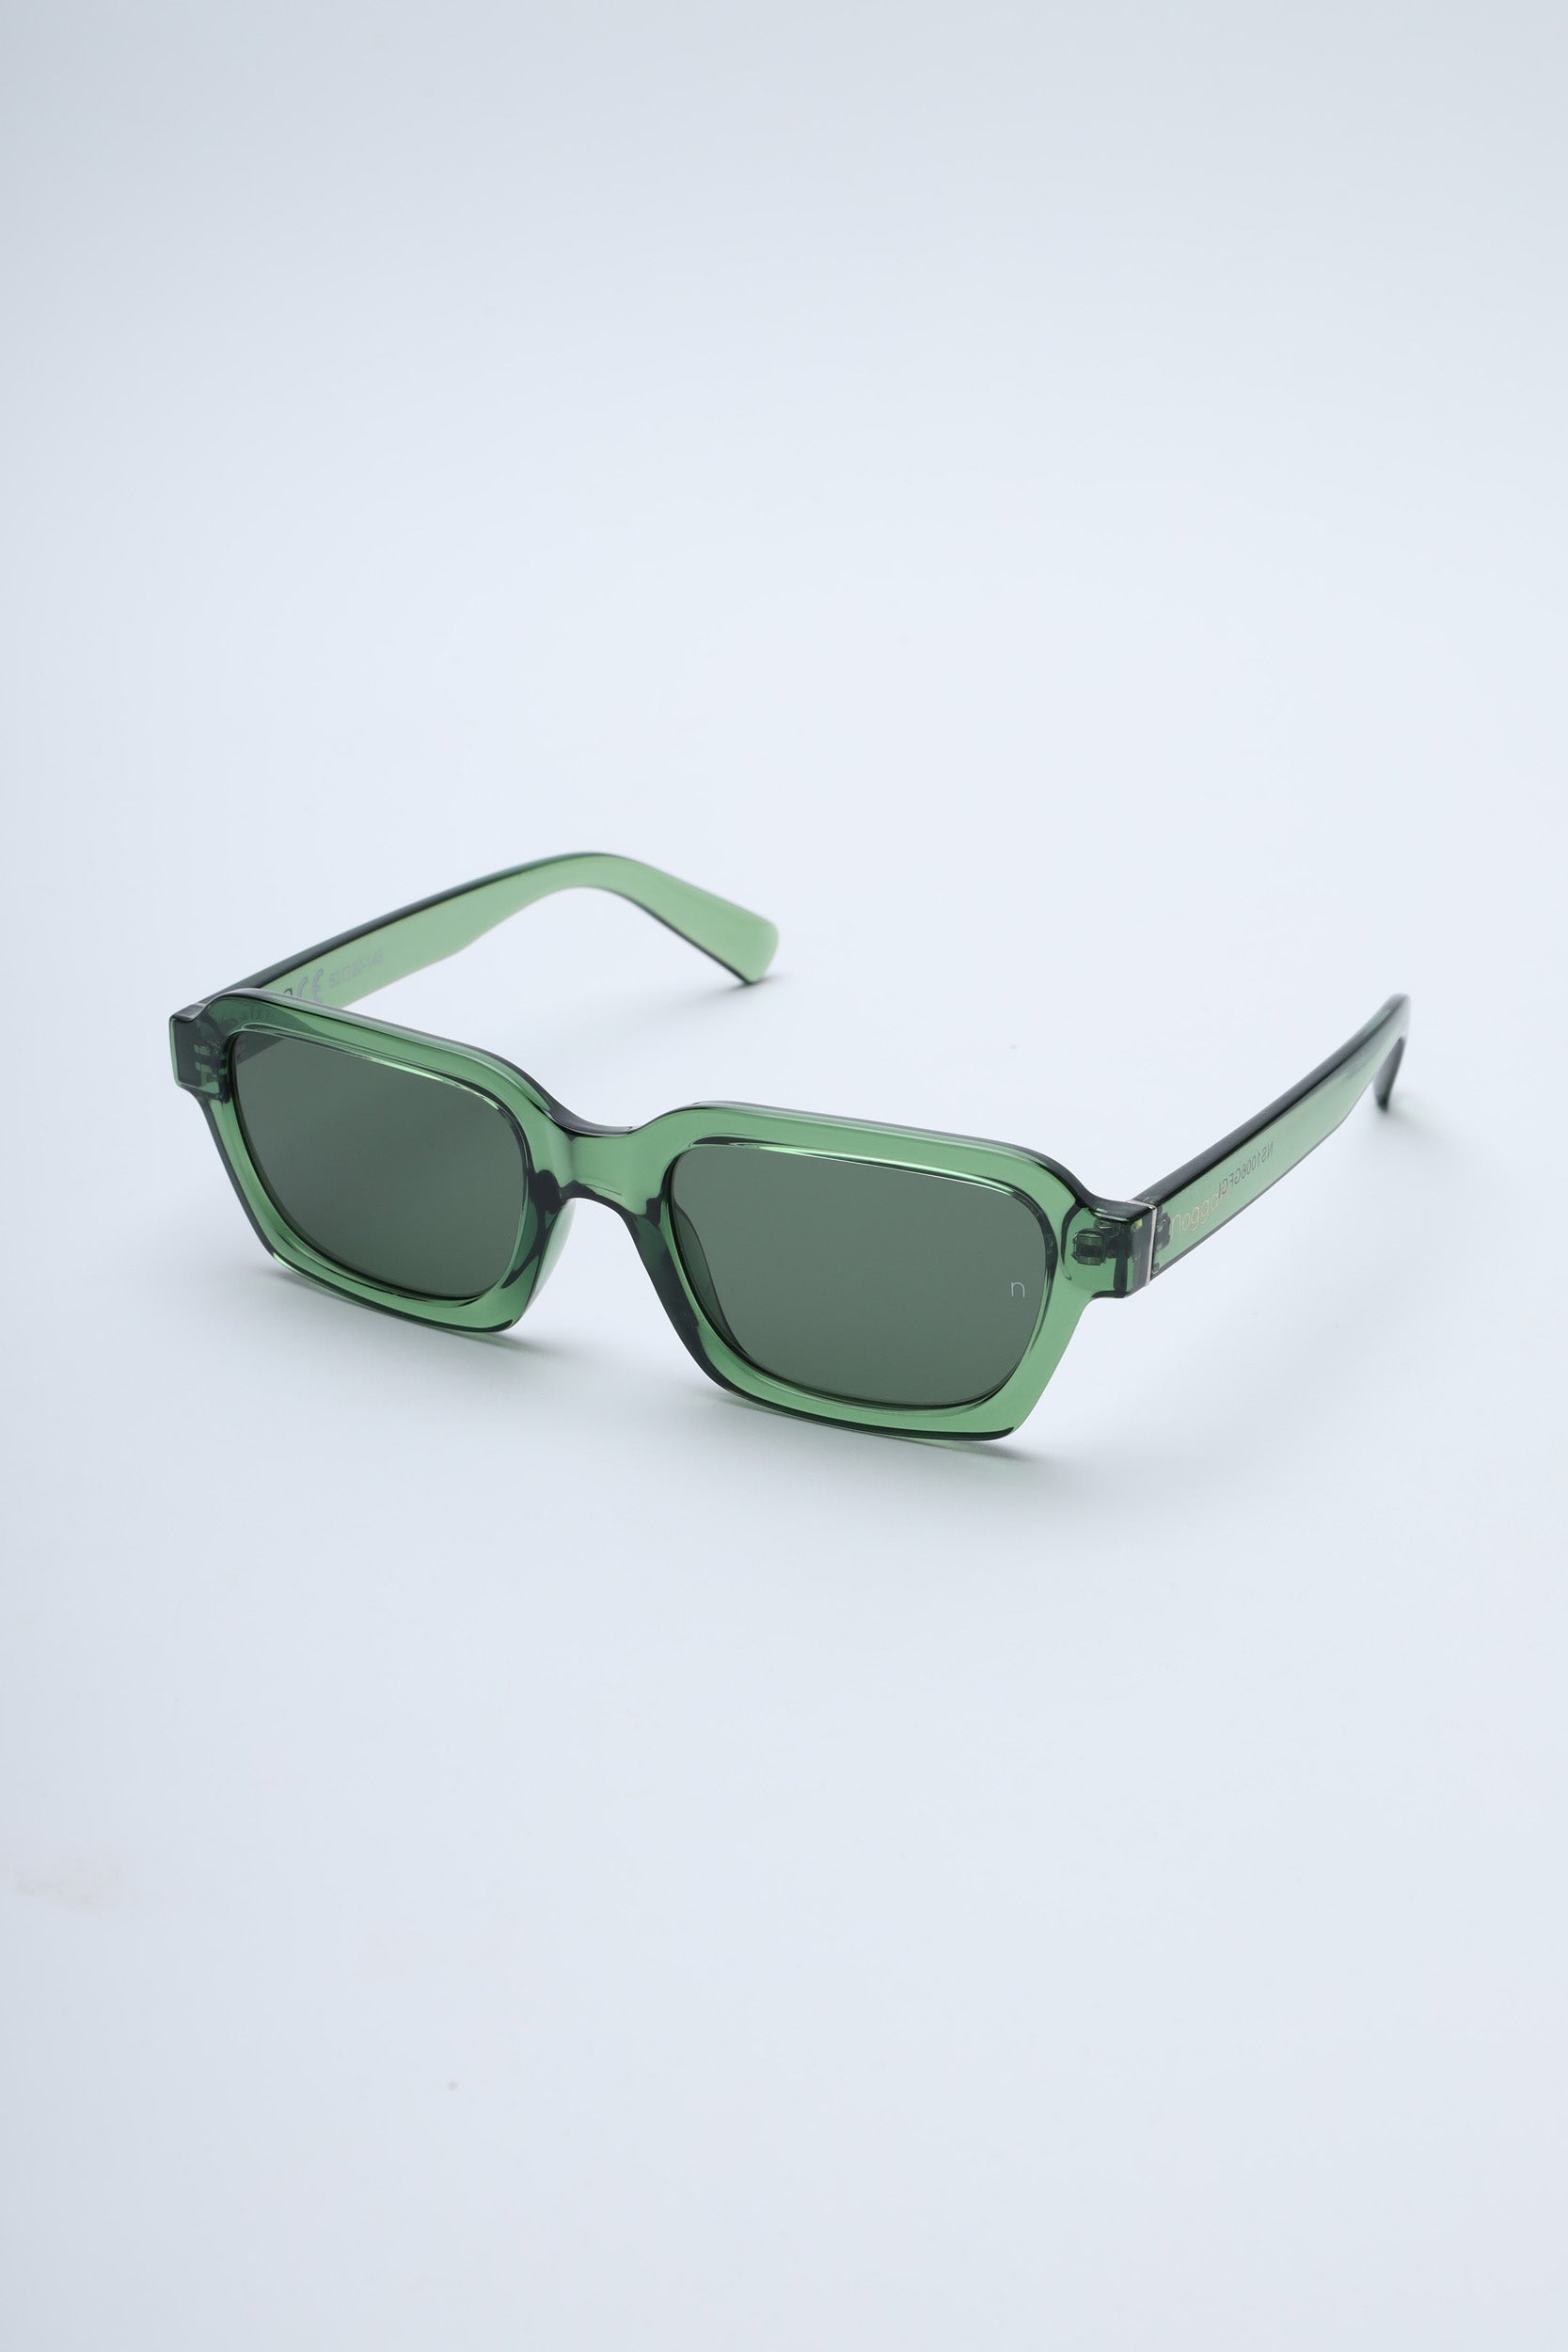 Buy Ray-Ban 0RB3447 Bottle Green Icons Round Sunglasses - 47 mm online